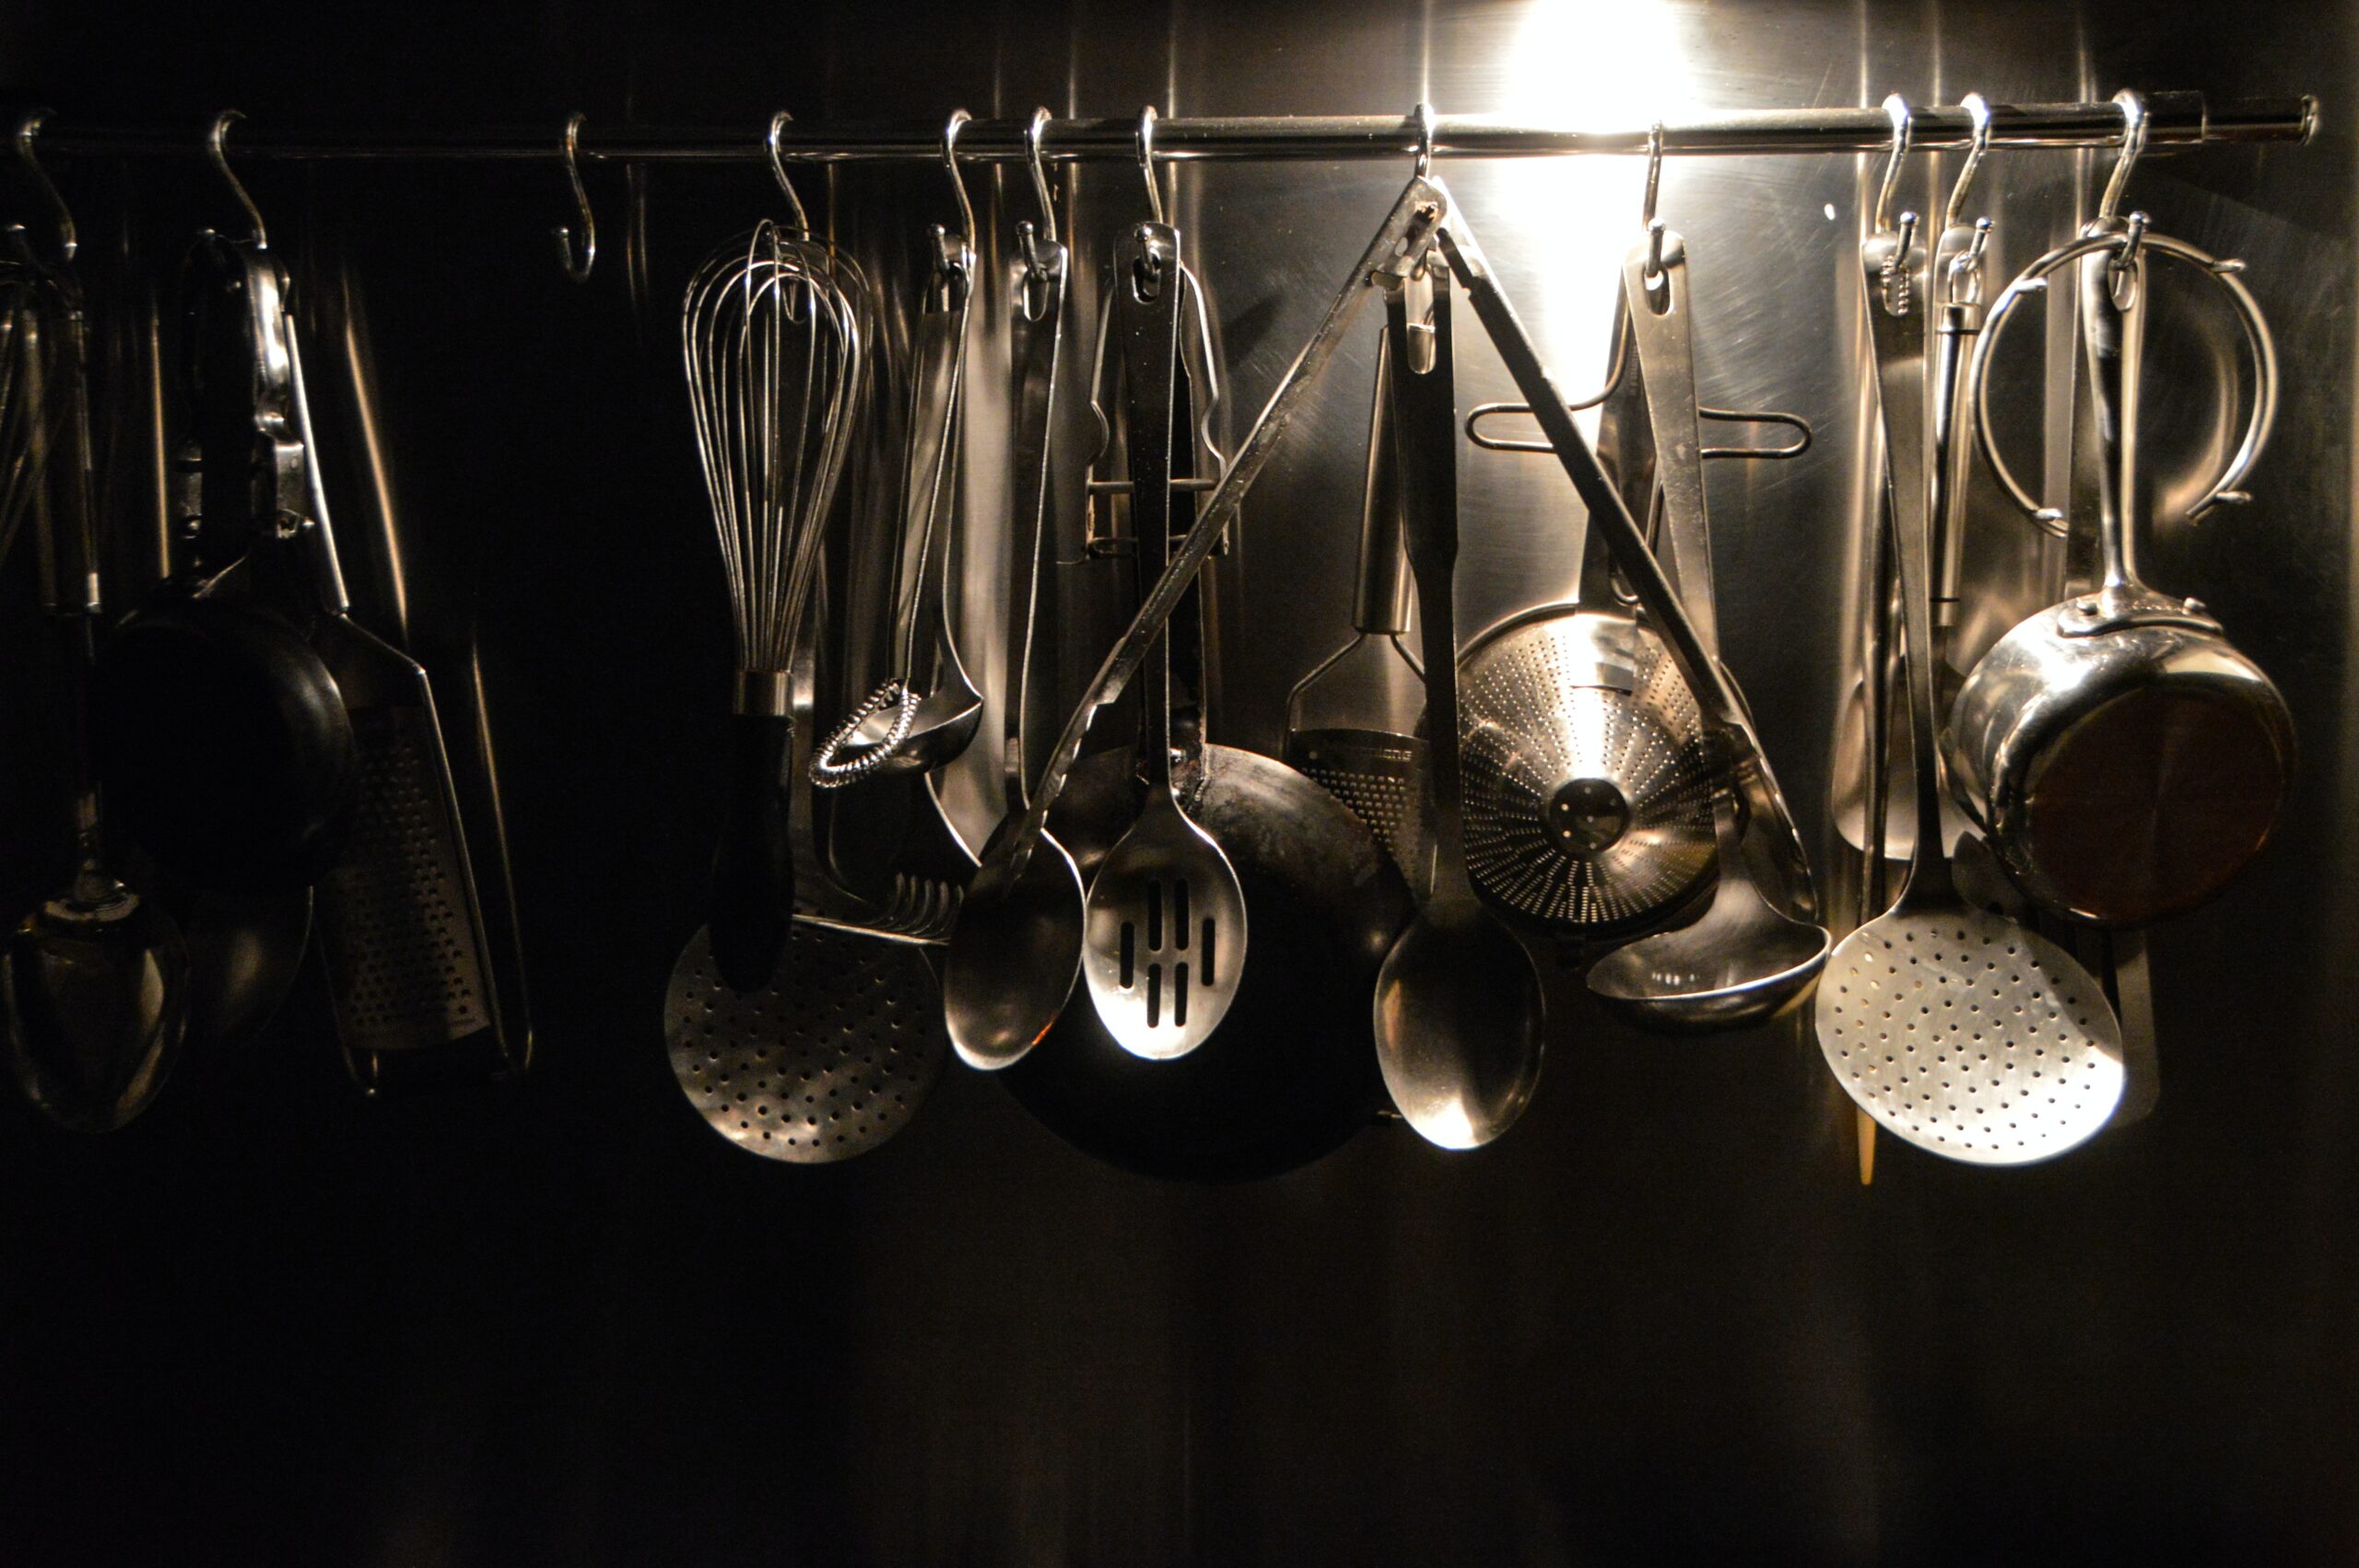 Ladles and Spoons